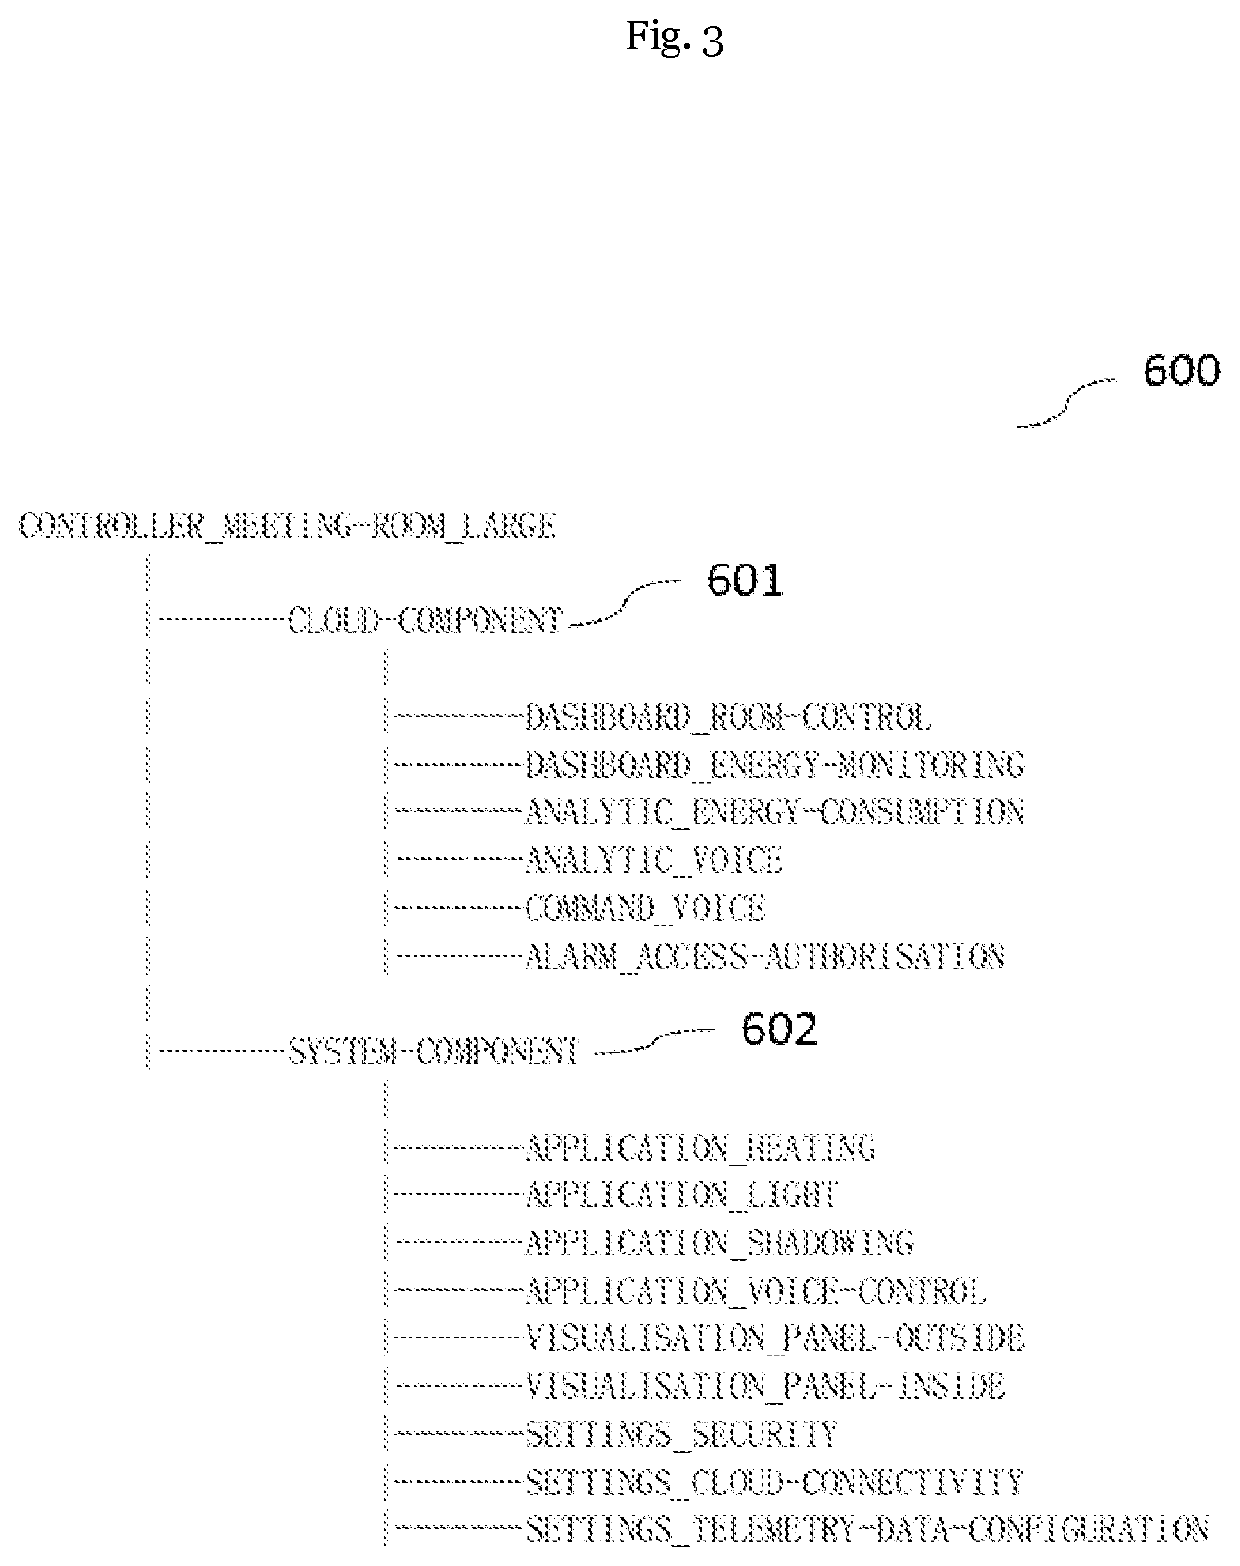 Generating and distributing configuration data structures for control systems